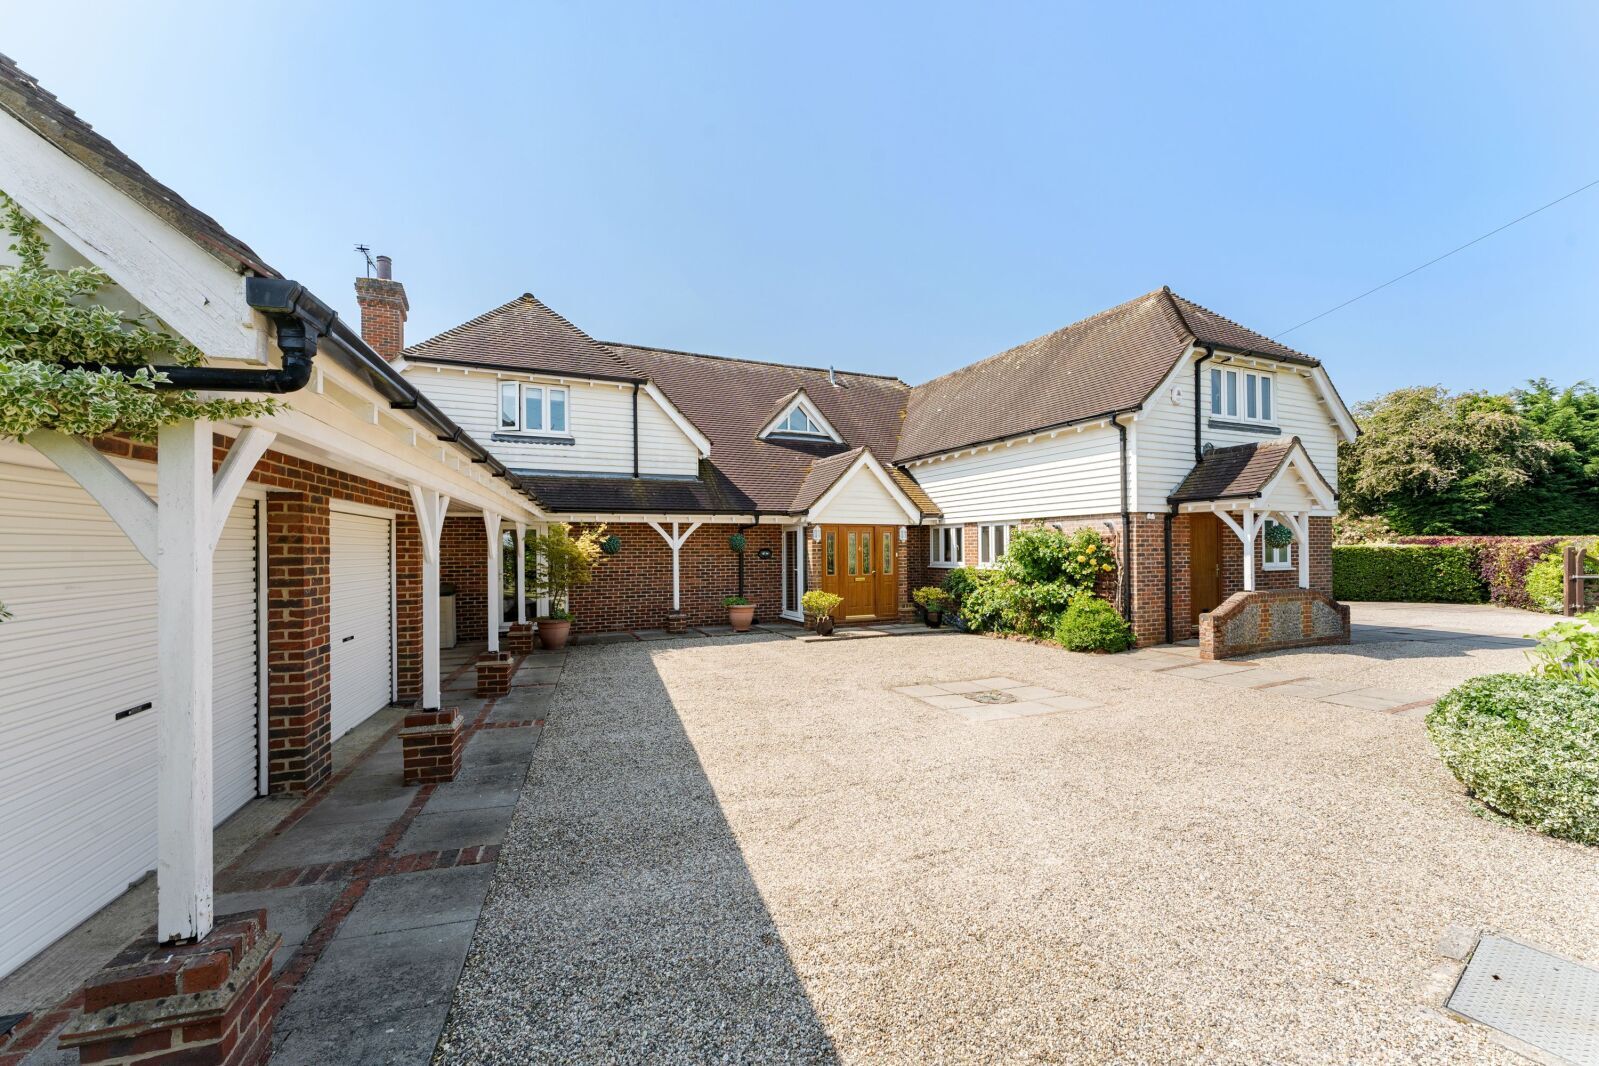 7 bedroom detached house for sale Patmore End, Ugley, CM22, main image